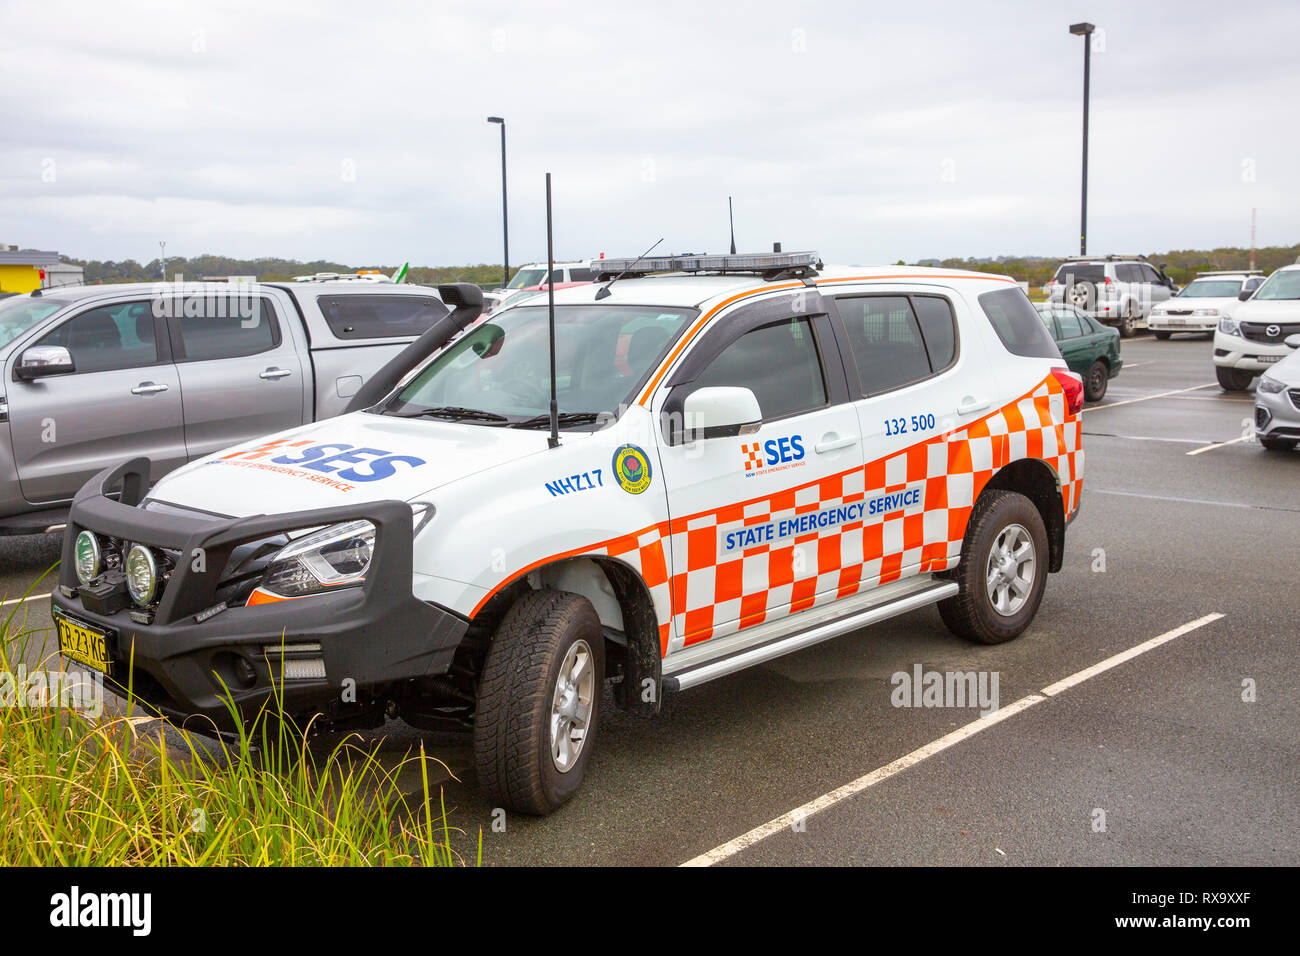 SES the State Emergency Service of New South Wales provides volunteers who help residents in emergency situations,Australia Stock Photo